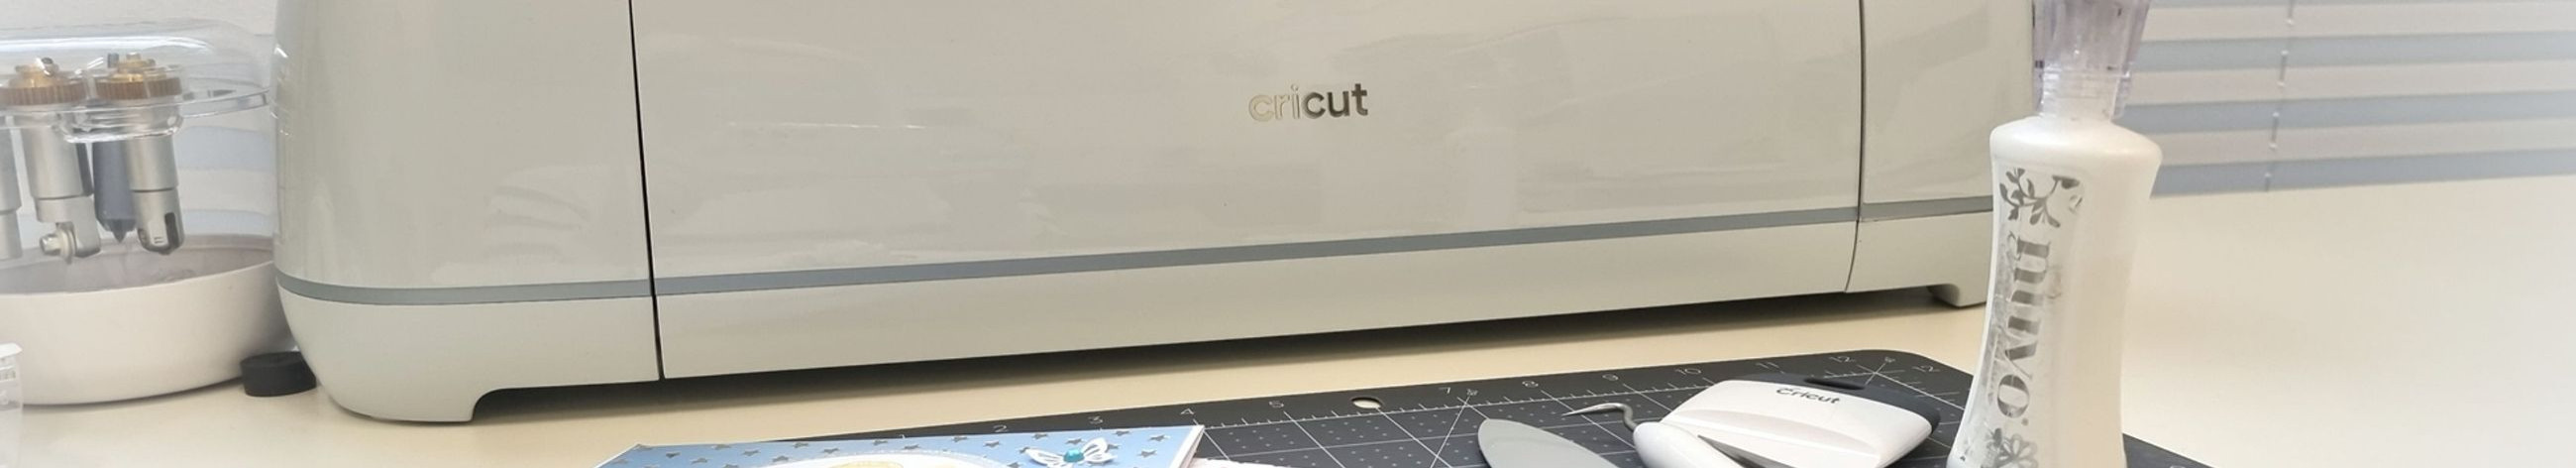 cricut products and accessories, cutting machines, cardboard, accessories for crafting, satin ribbons, blanks, gpc products, workshops, crafting accessories, creative workshops